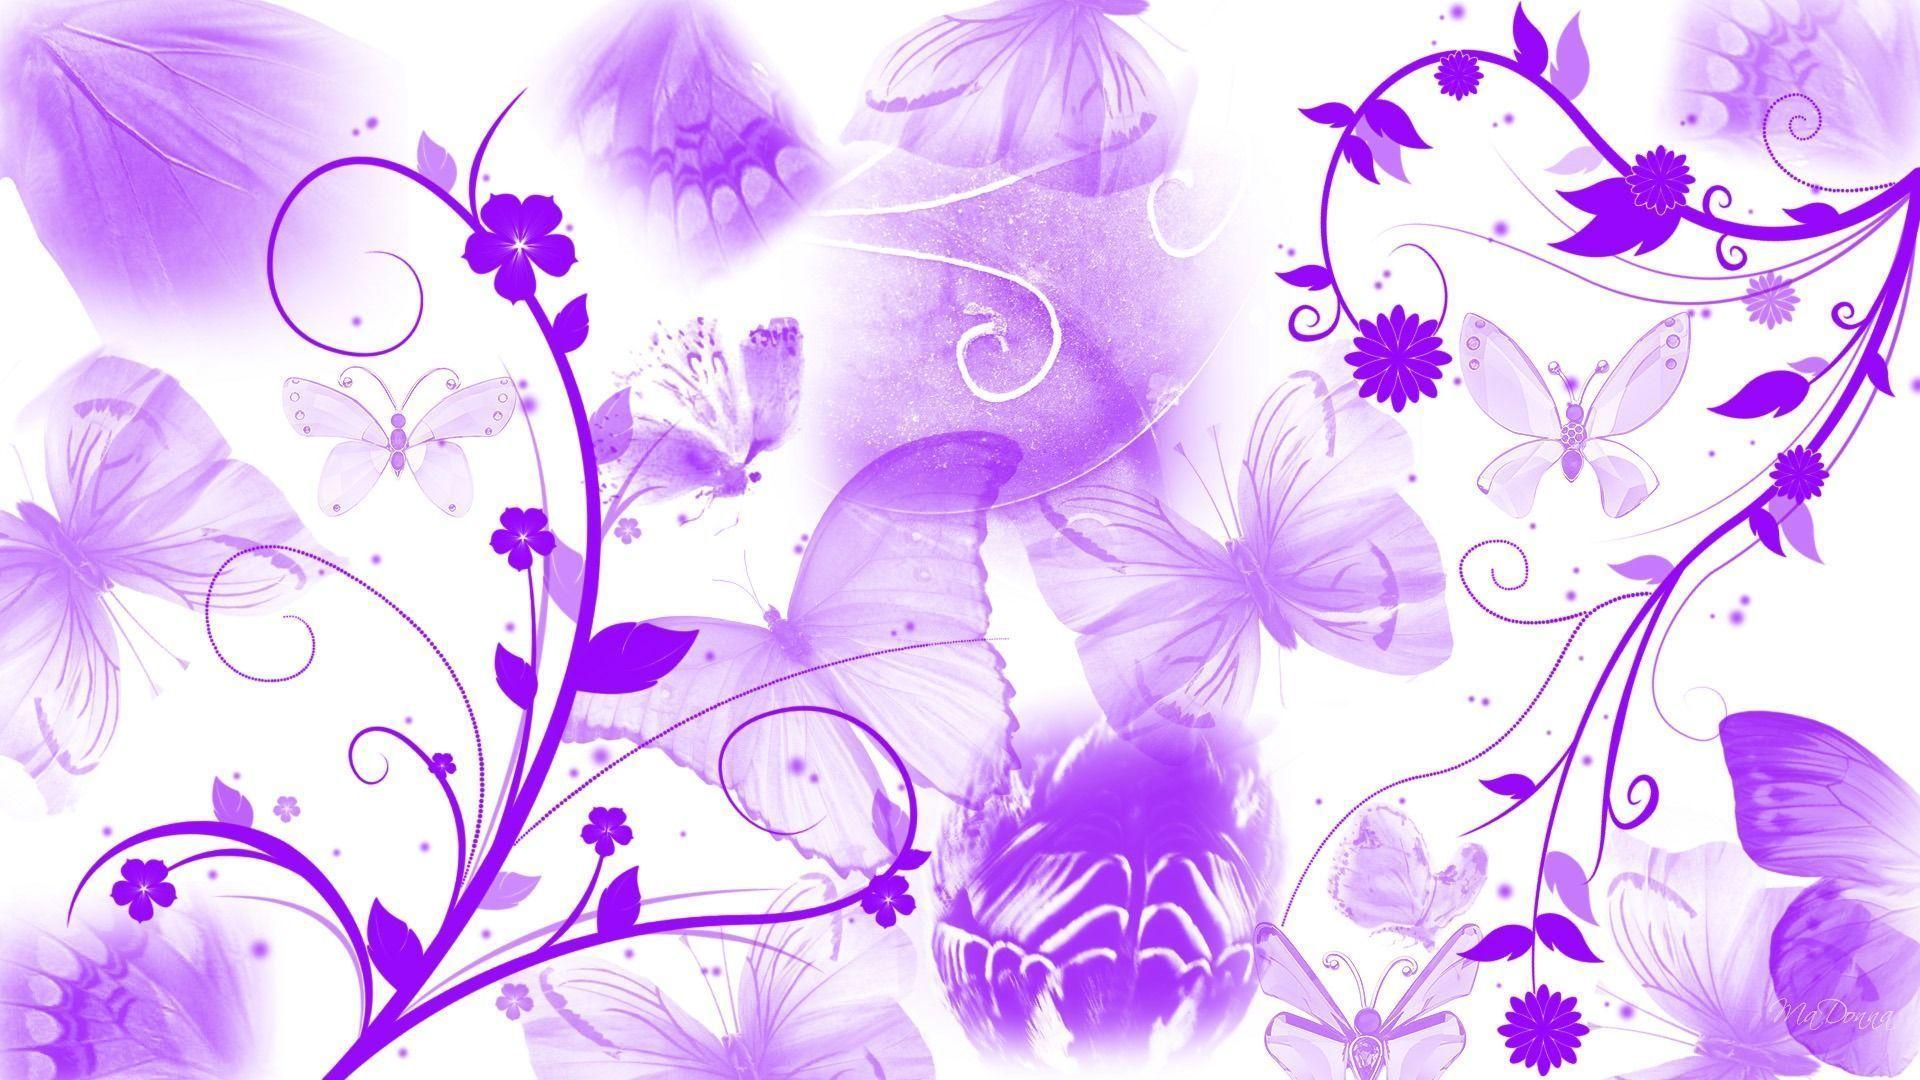 Wallpaper For > Purple Butterflies And Flowers Background